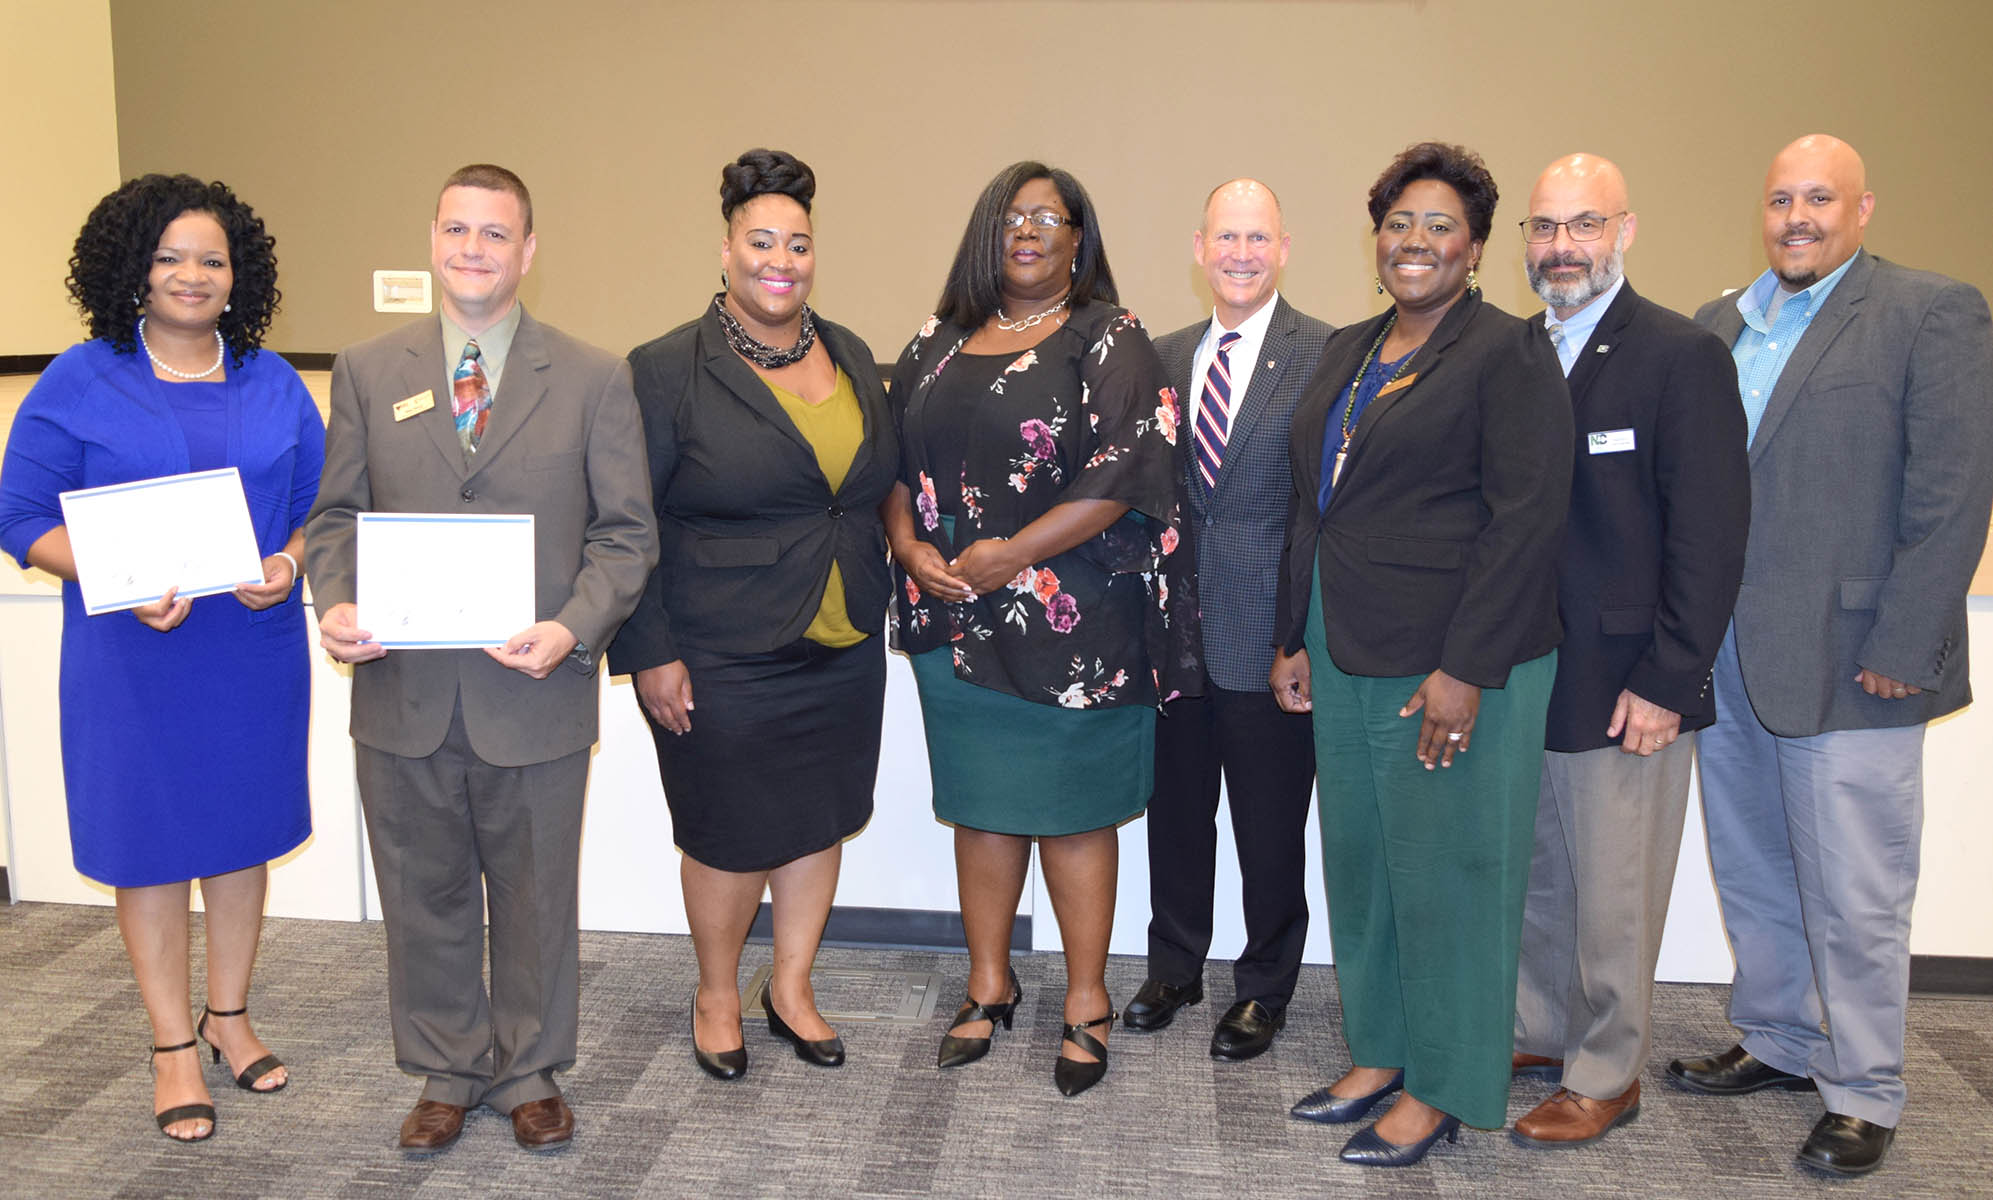 Click to enlarge,  The Triangle South Workforce Development Board (TSWDB), serving Chatham, Harnett, Lee, and Sampson counties, recently had two NCWorks Career Pathways certified by the NCWorks Commission. Pictured are, left to right: Rosalind Cross, Director of Workforce Development and WIOA Programs, TSWDB; Mike Peluso, Business Services Coordinator, TSWDB; Jessica Ingram, Business Engagement Coordinator, TSWDB; Angela Nicholson, Youth Program Coordinator, TSWDB; Kevin Trapani, NCWorks Commission Chairman; Kim Shaw, Adult Services Coordinator, TSWDB; Scott Panagrosso, Career Pathways Facilitator; and John Lowery, Regional Operations Director, Sandhills Region. 